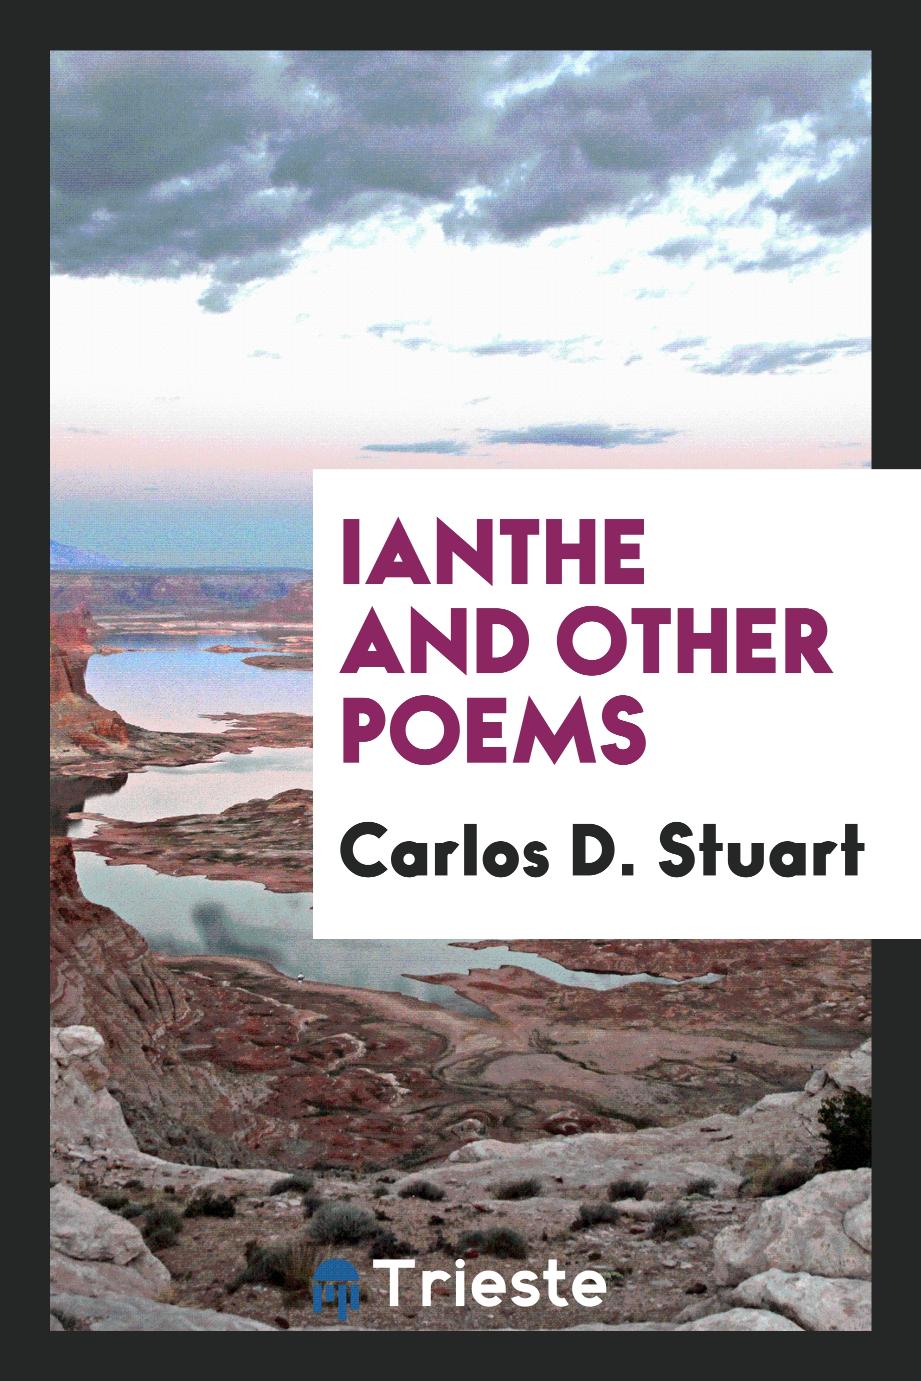 Ianthe and other poems